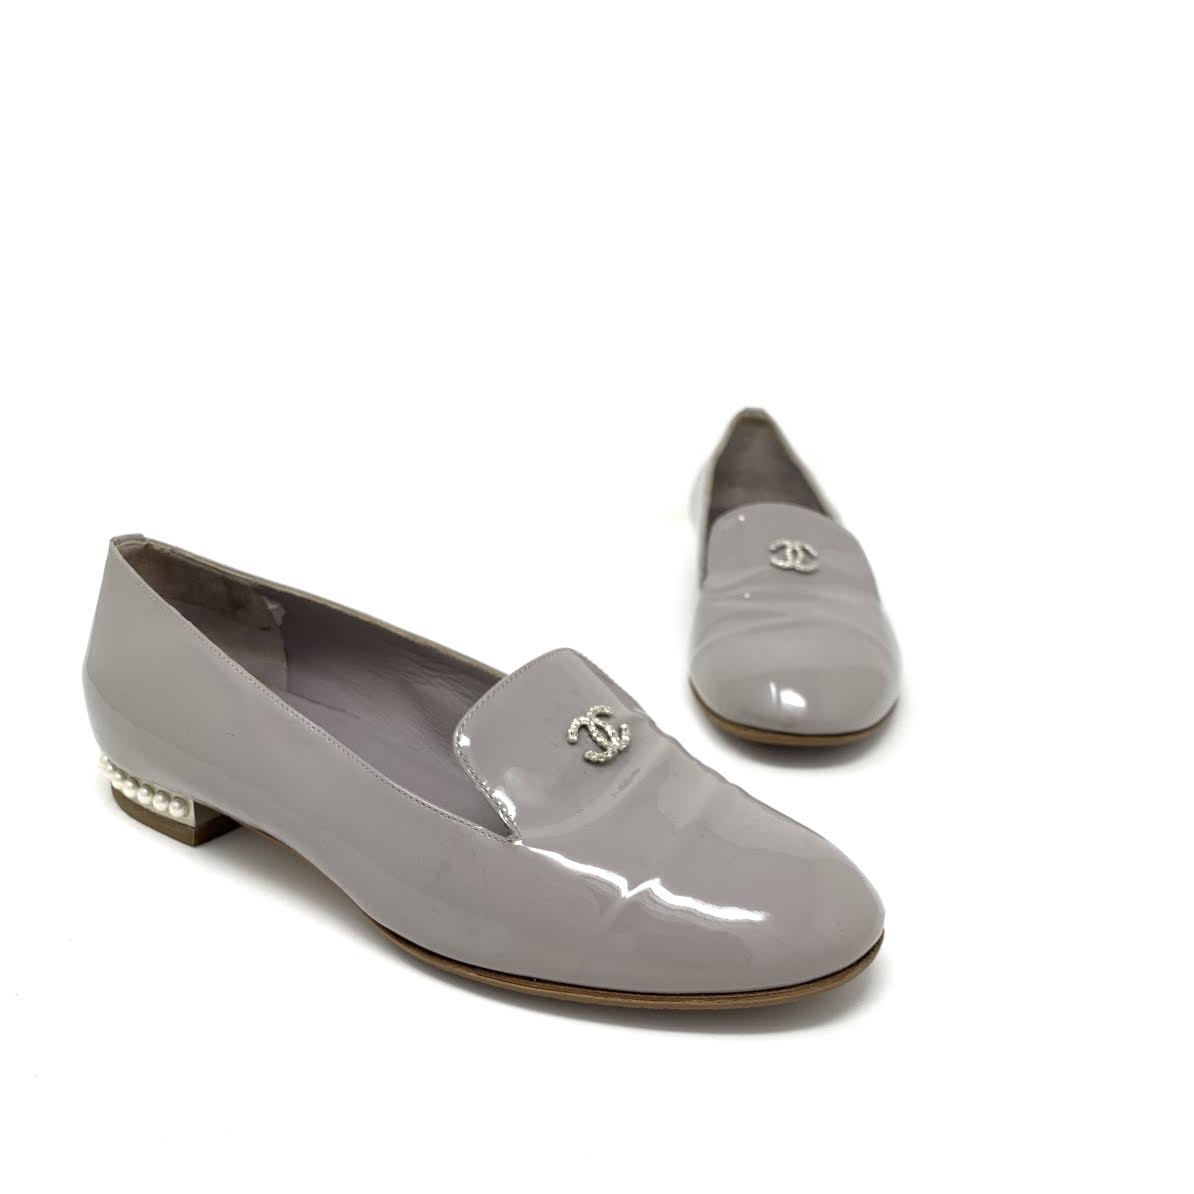 Chanel Patent Leather Flats - Size 37.5